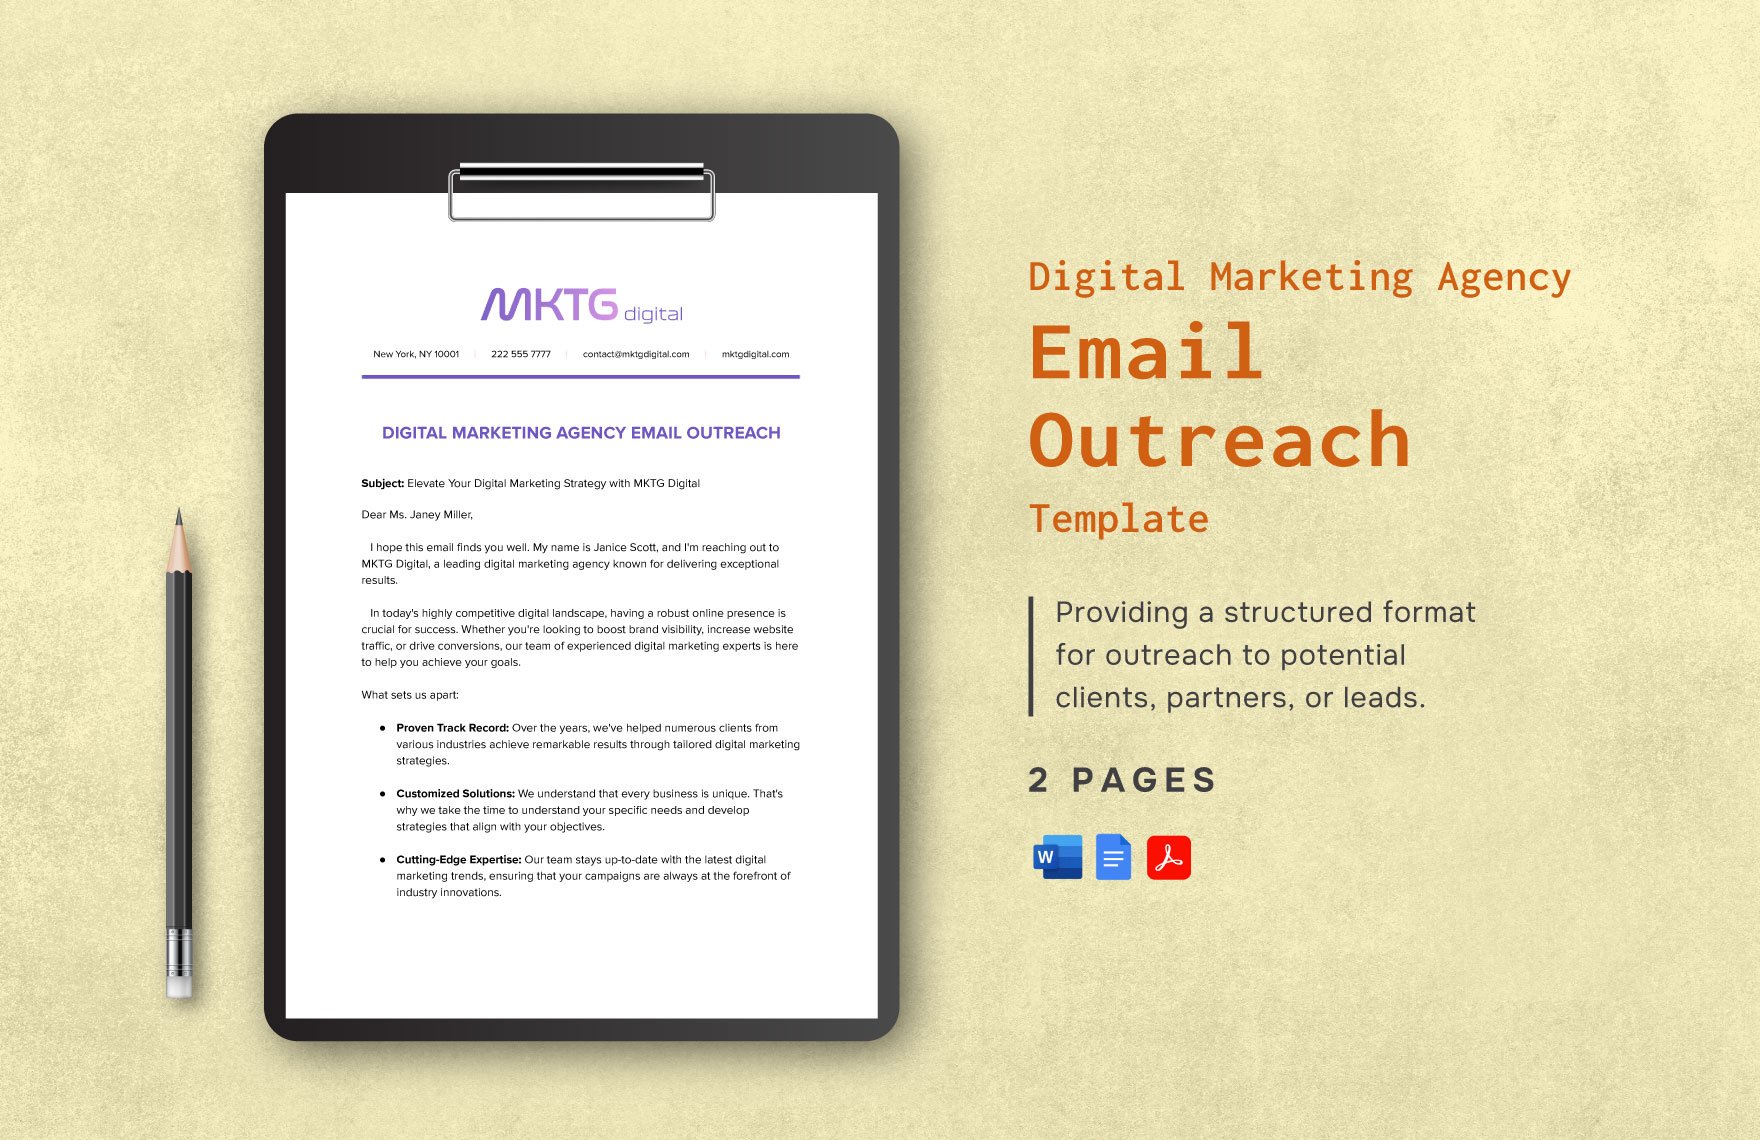 Digital Marketing Agency Email Outreach Template in Word, Google Docs, PDF